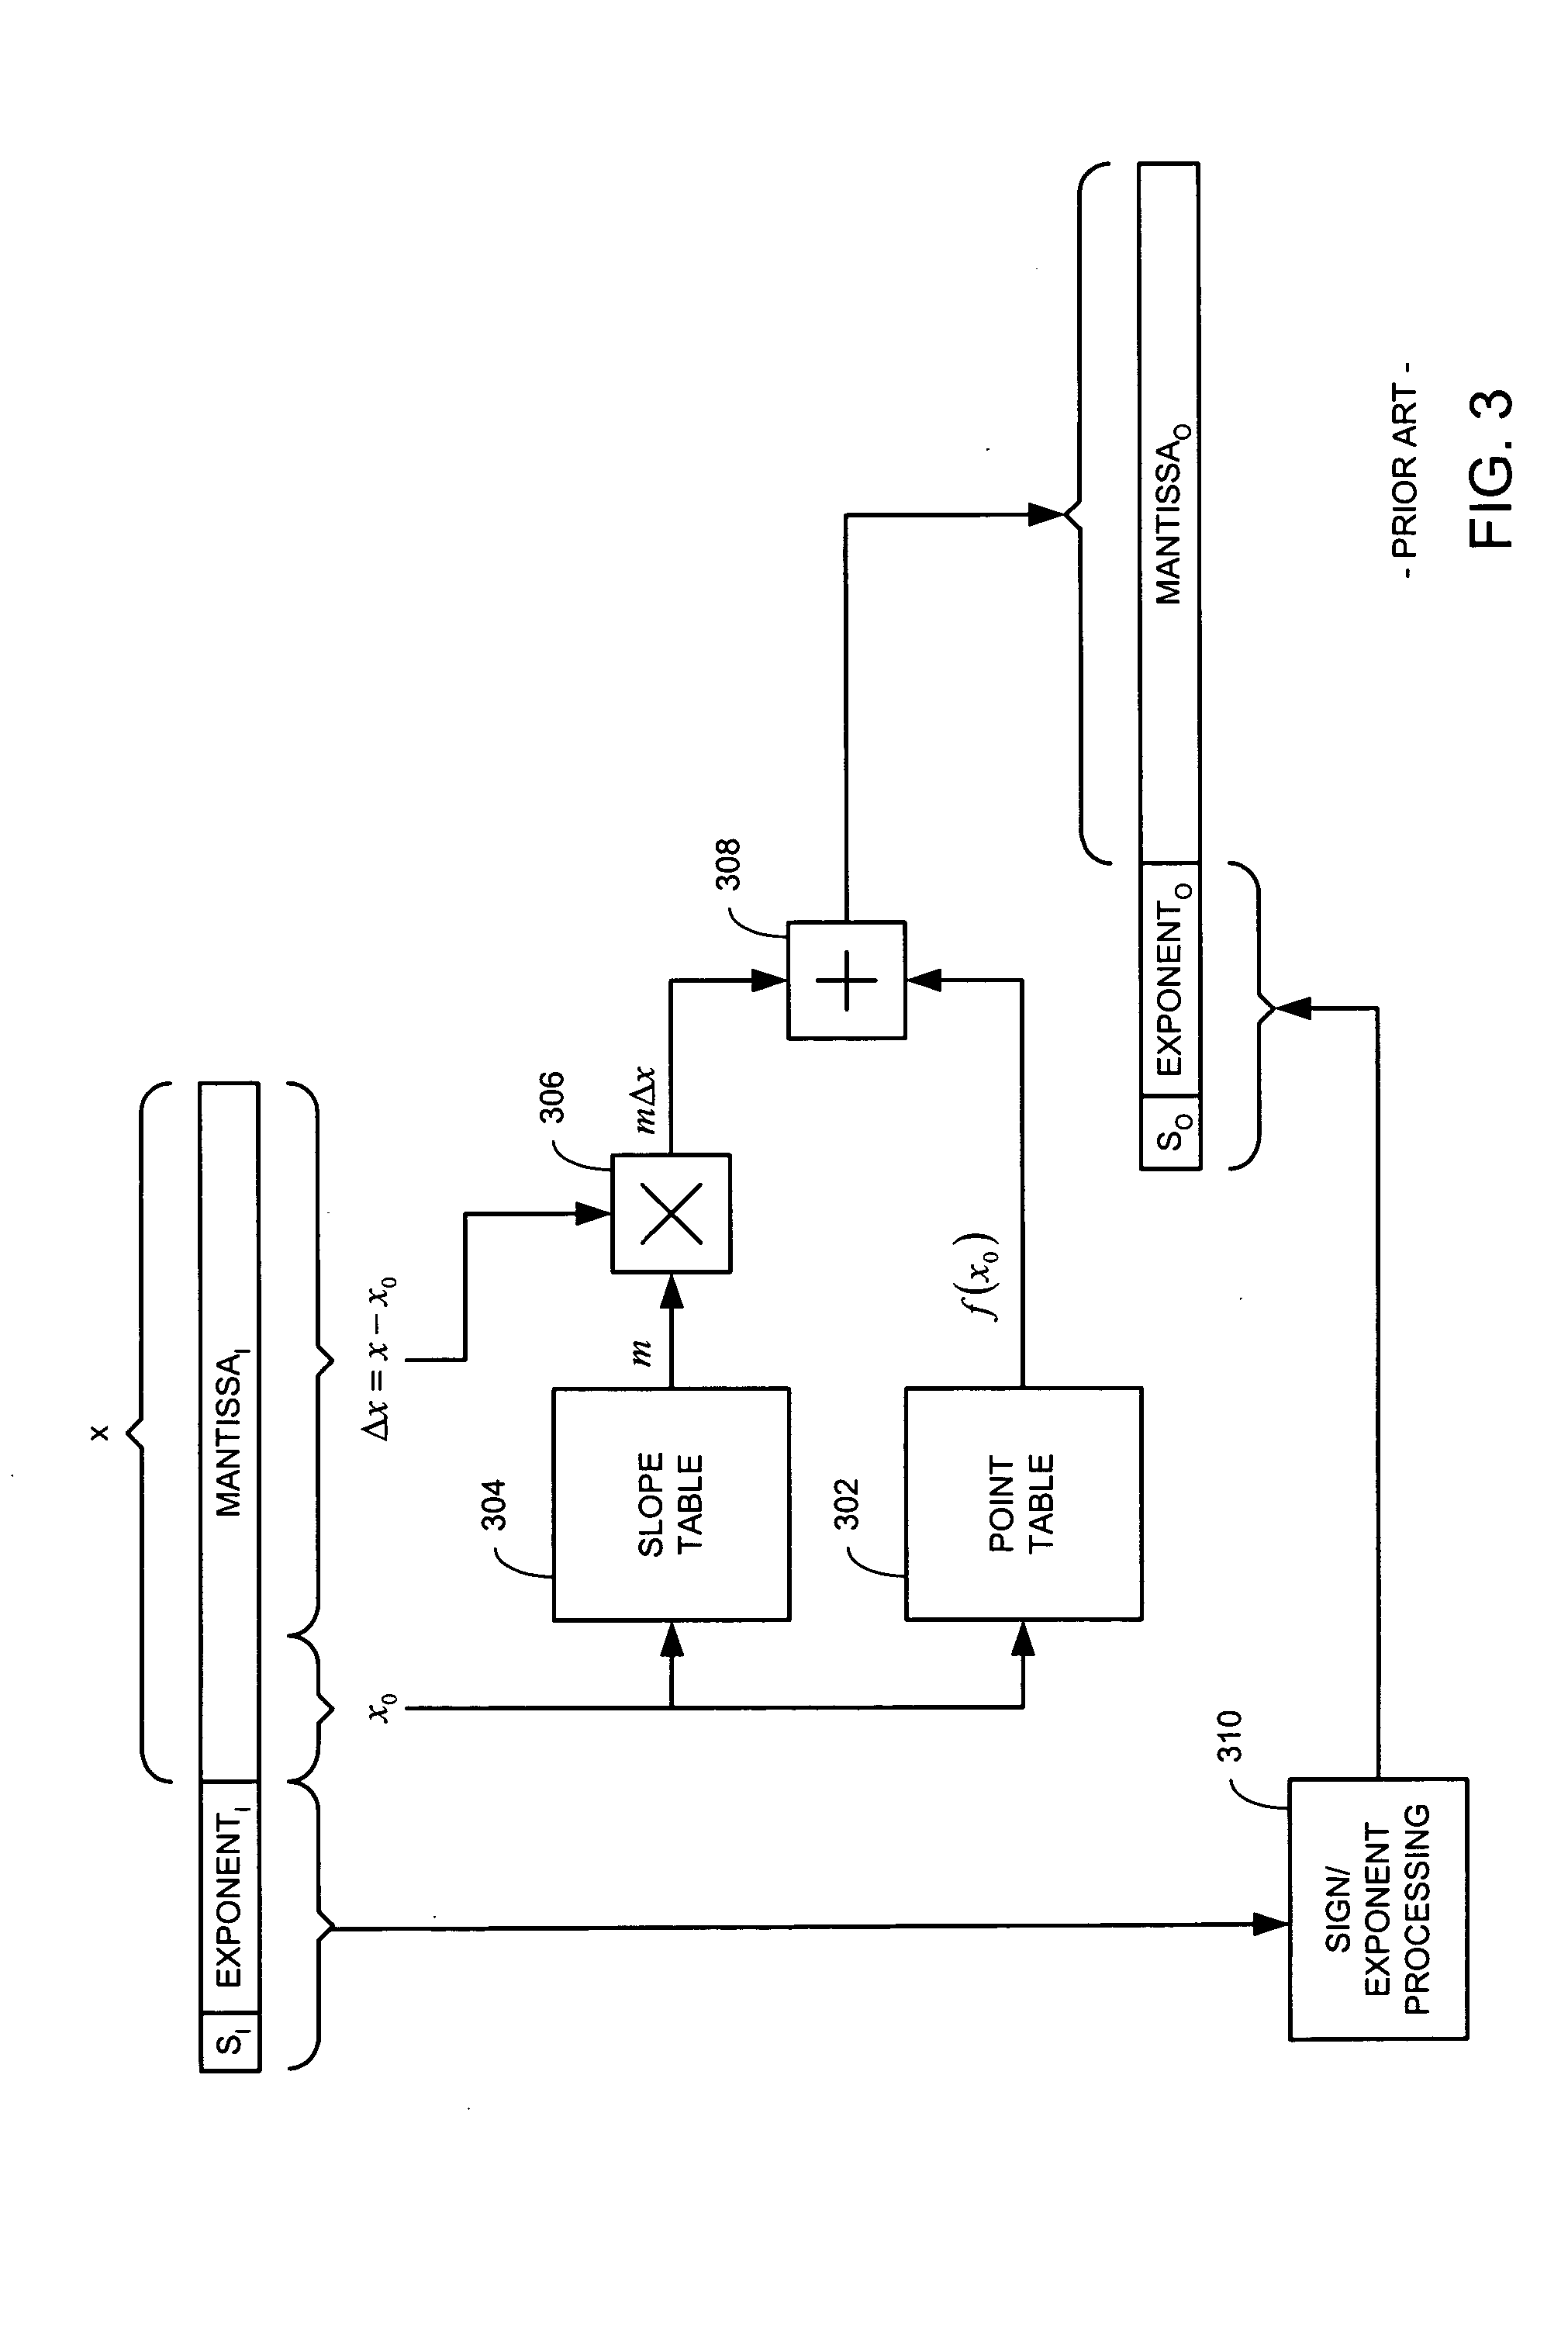 Method and system for approximating sine and cosine functions